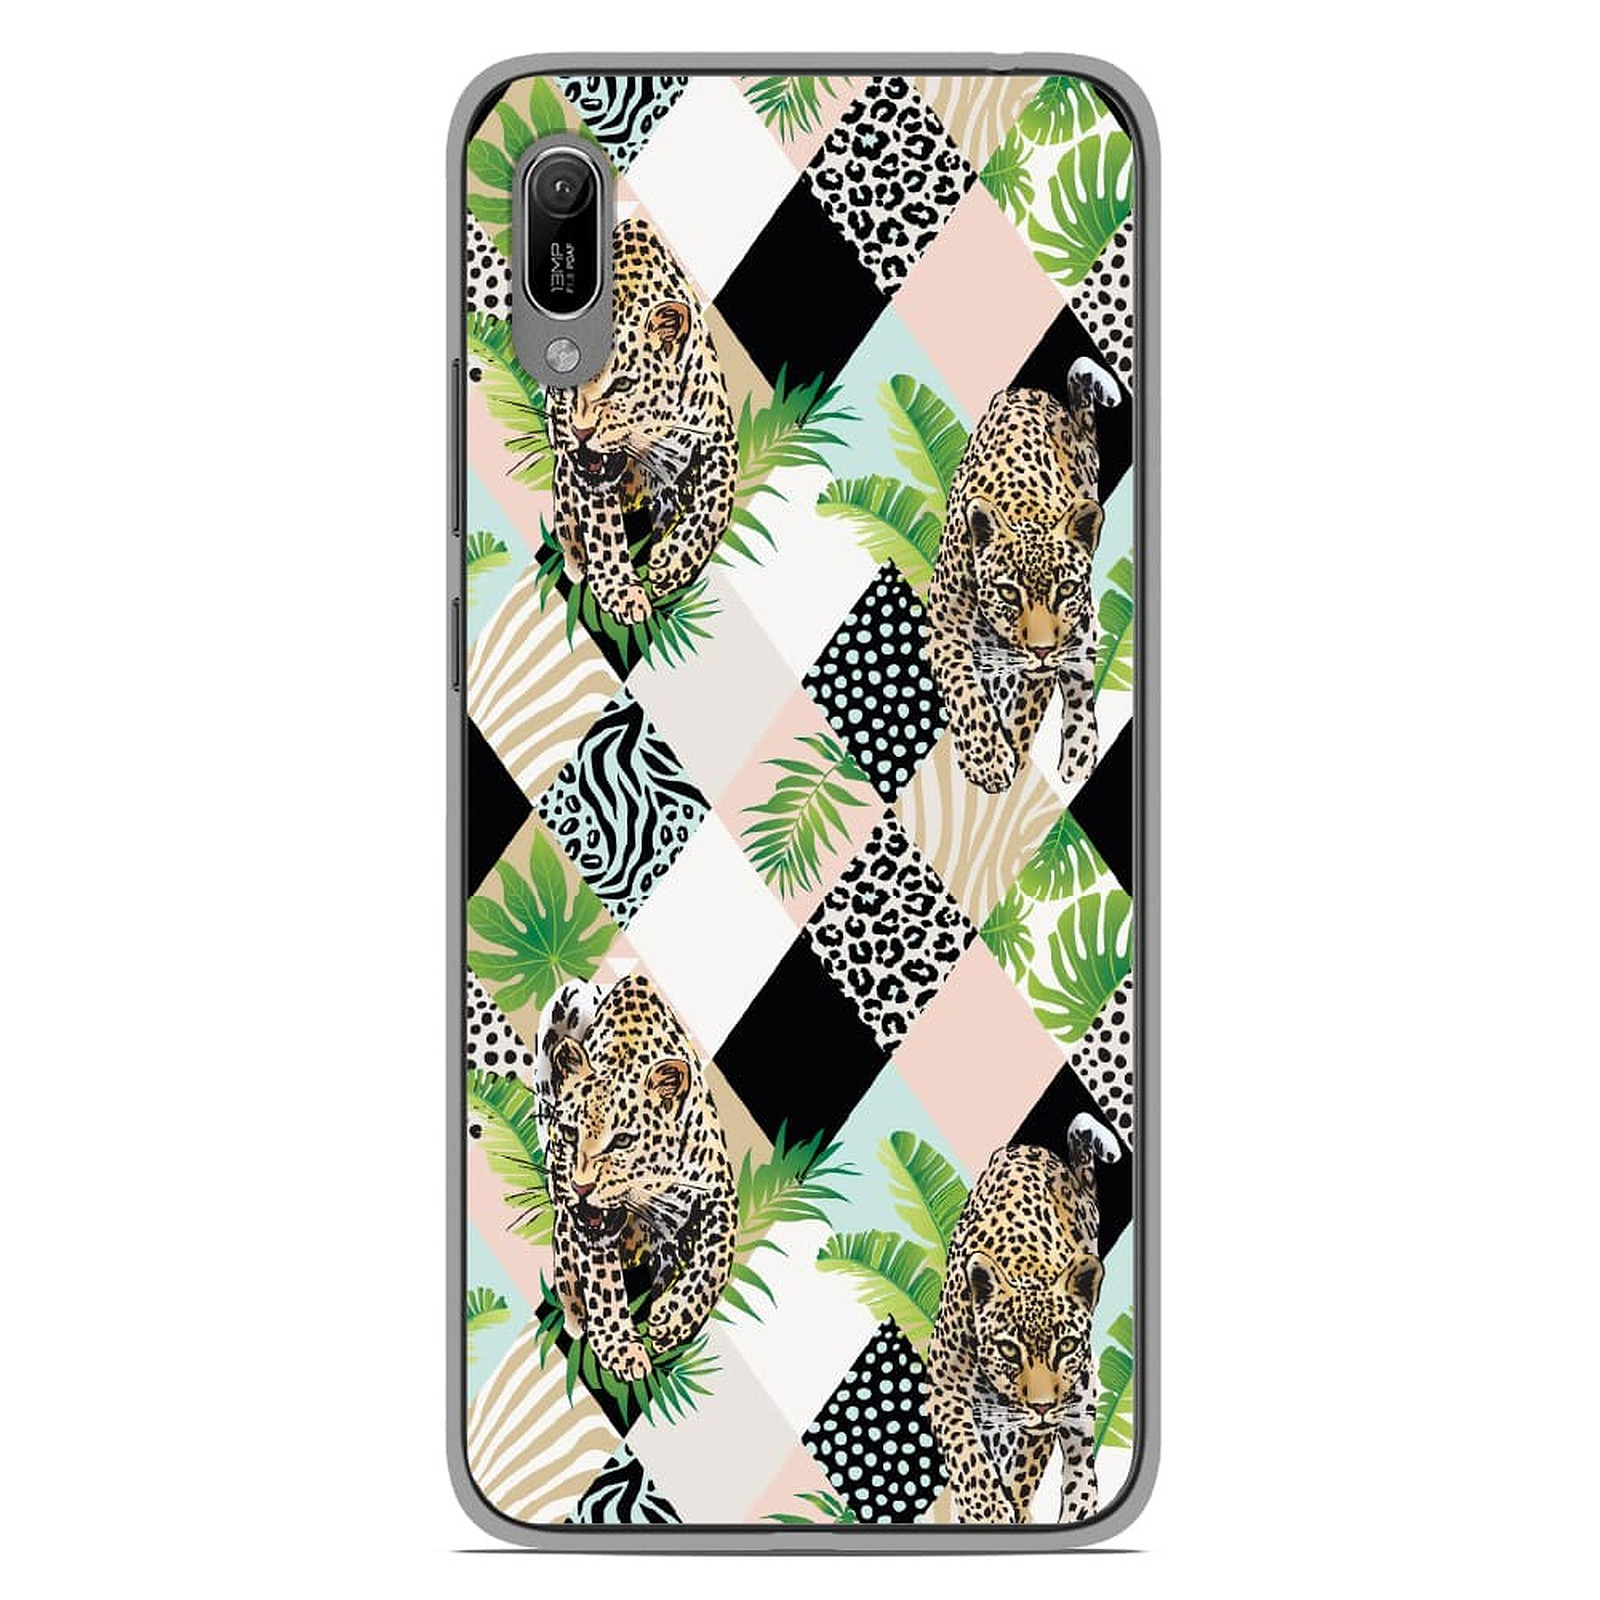 1001 Coques Coque silicone gel Huawei Y6 2019 motif Leopard losange - Coque telephone 1001Coques